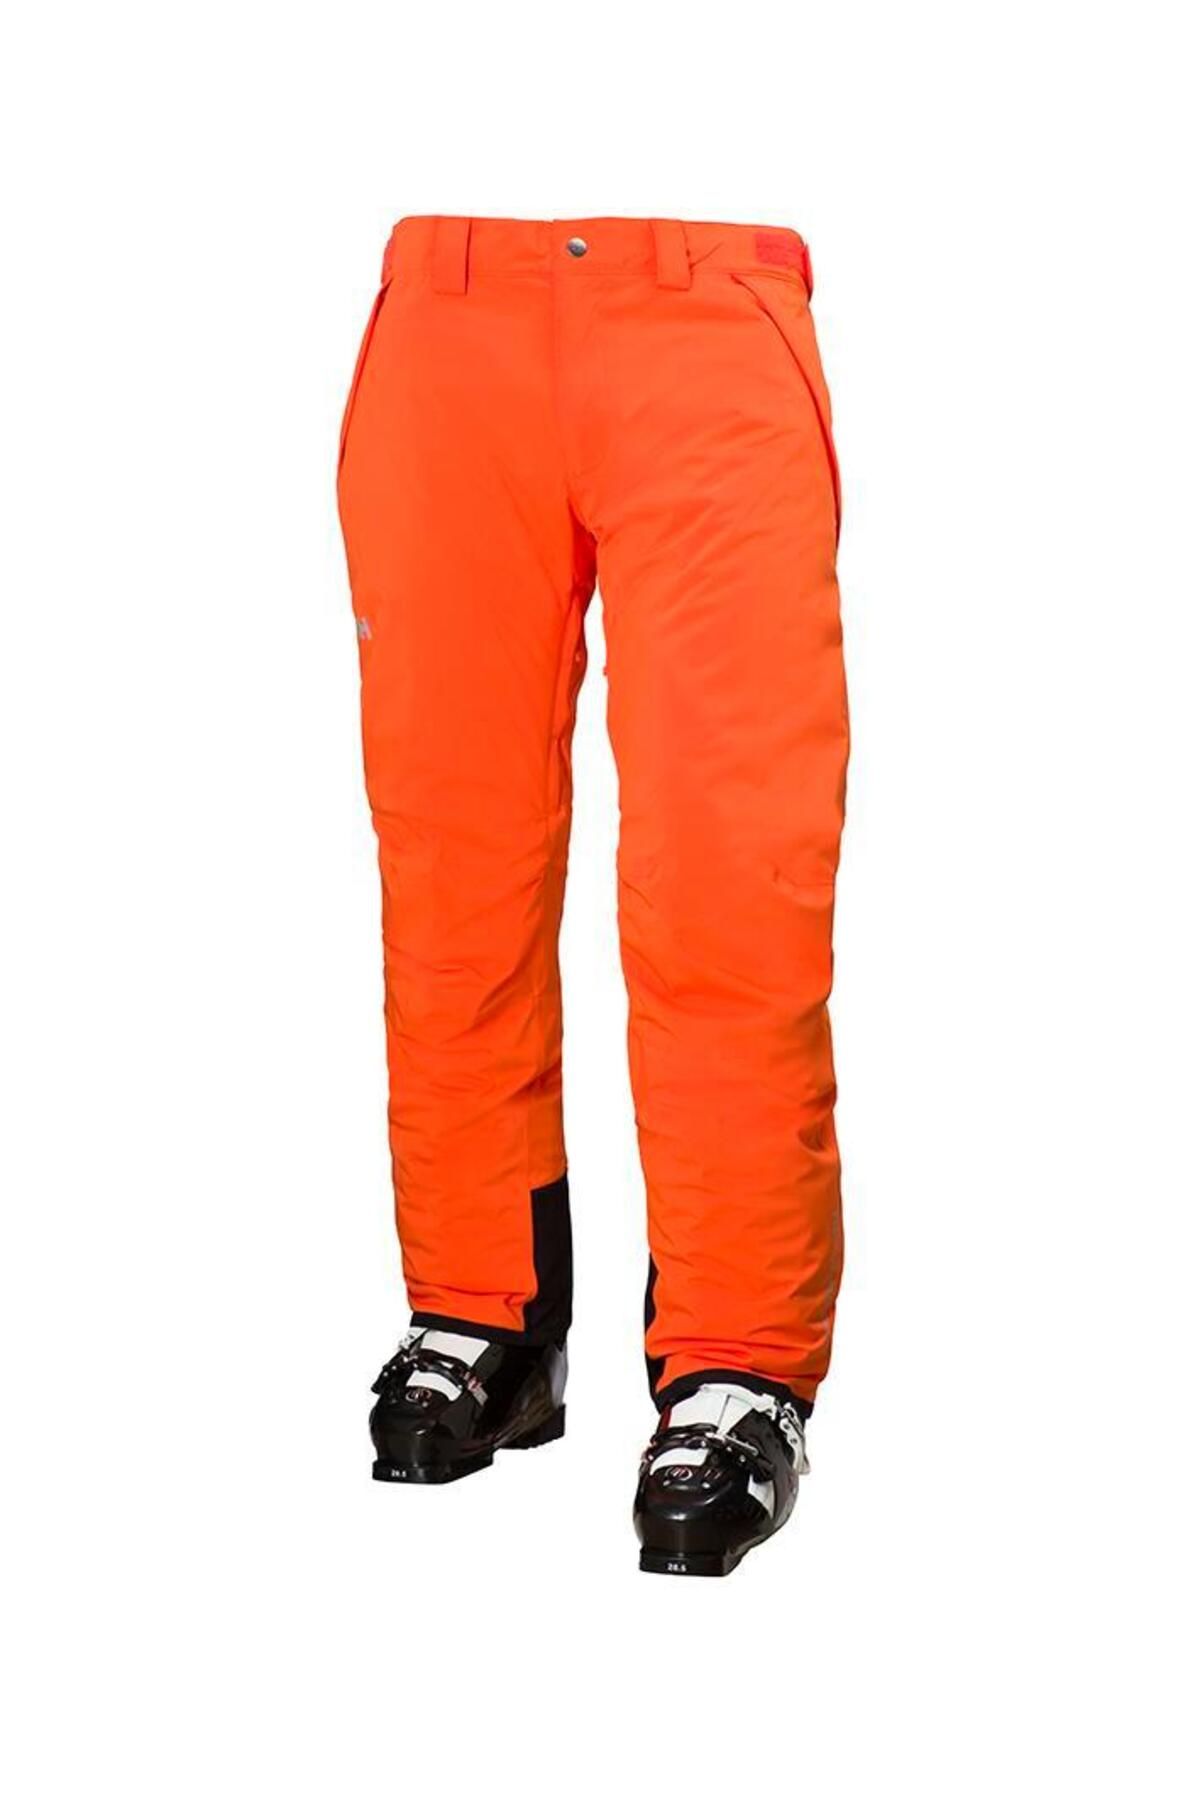 Helly Hansen Hh Velocity Insulated Pant